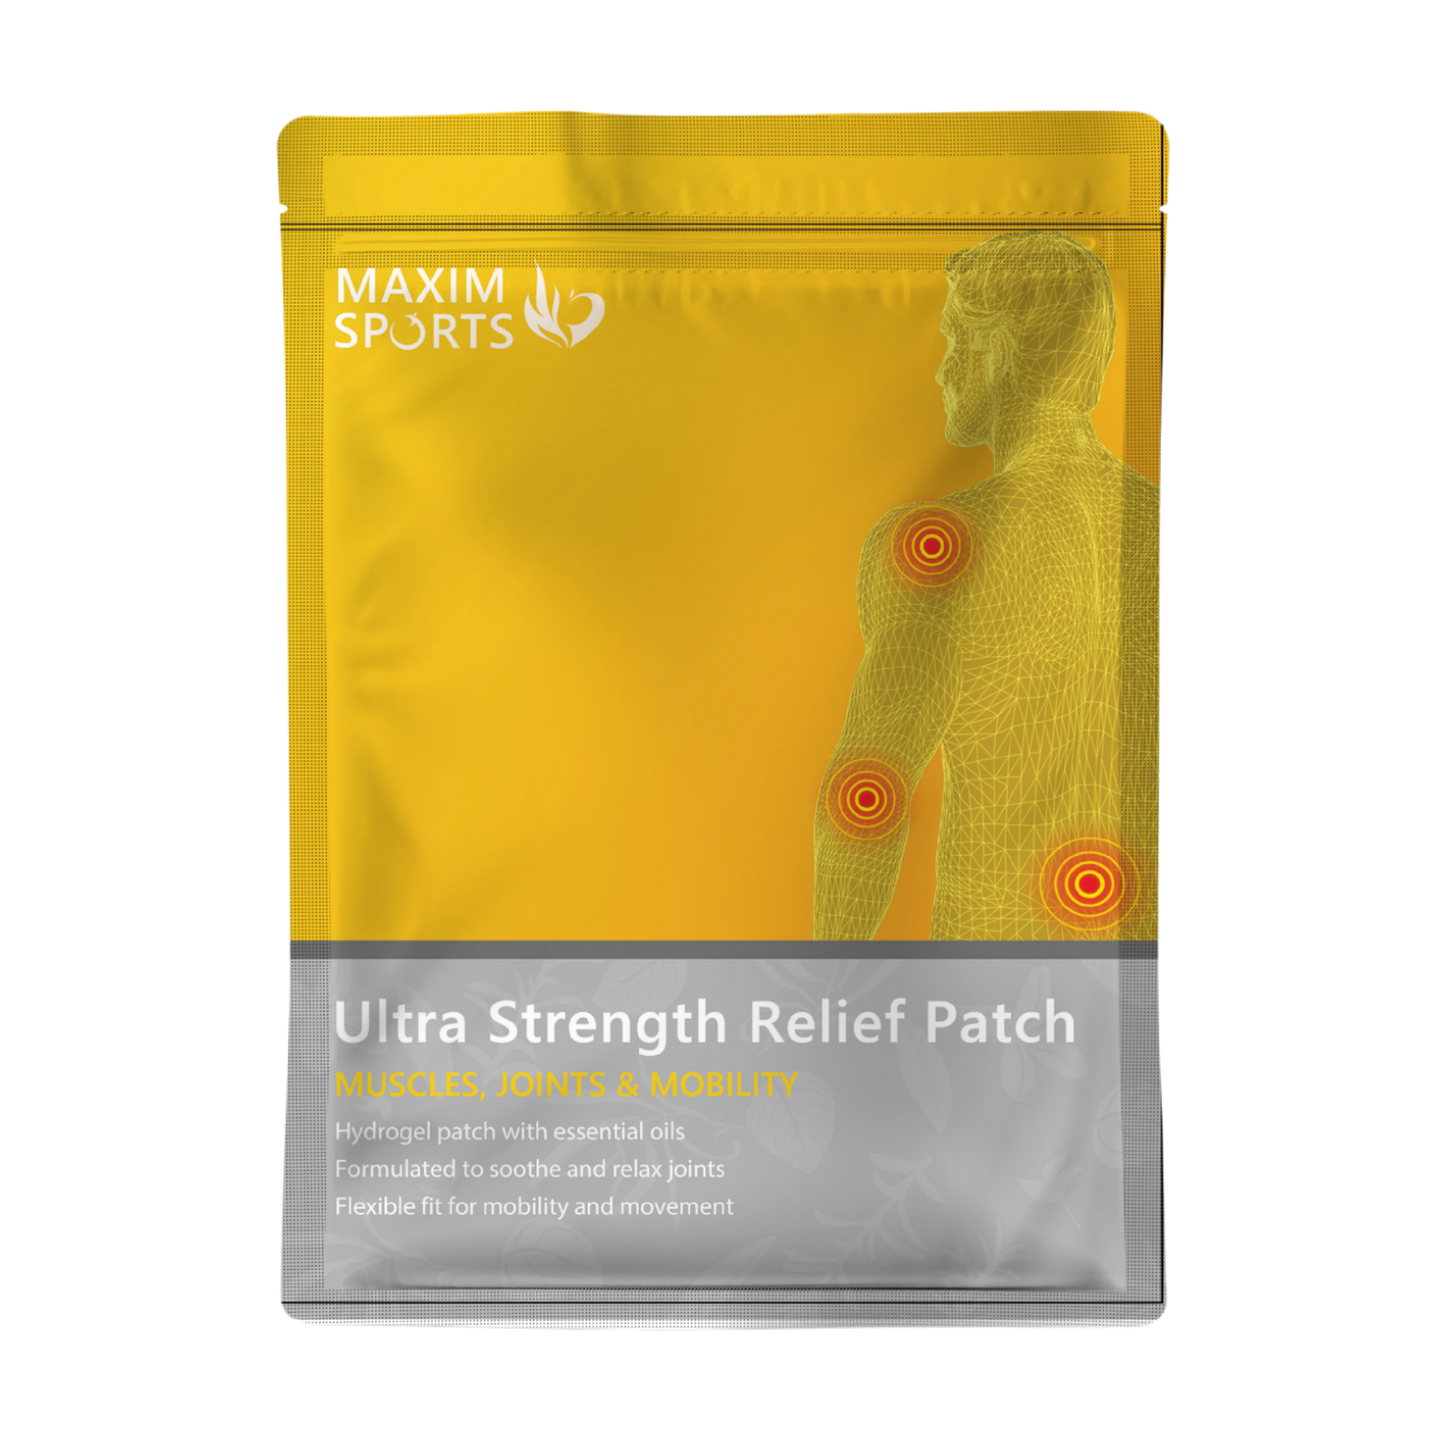 Ultra Strength Relief Patch